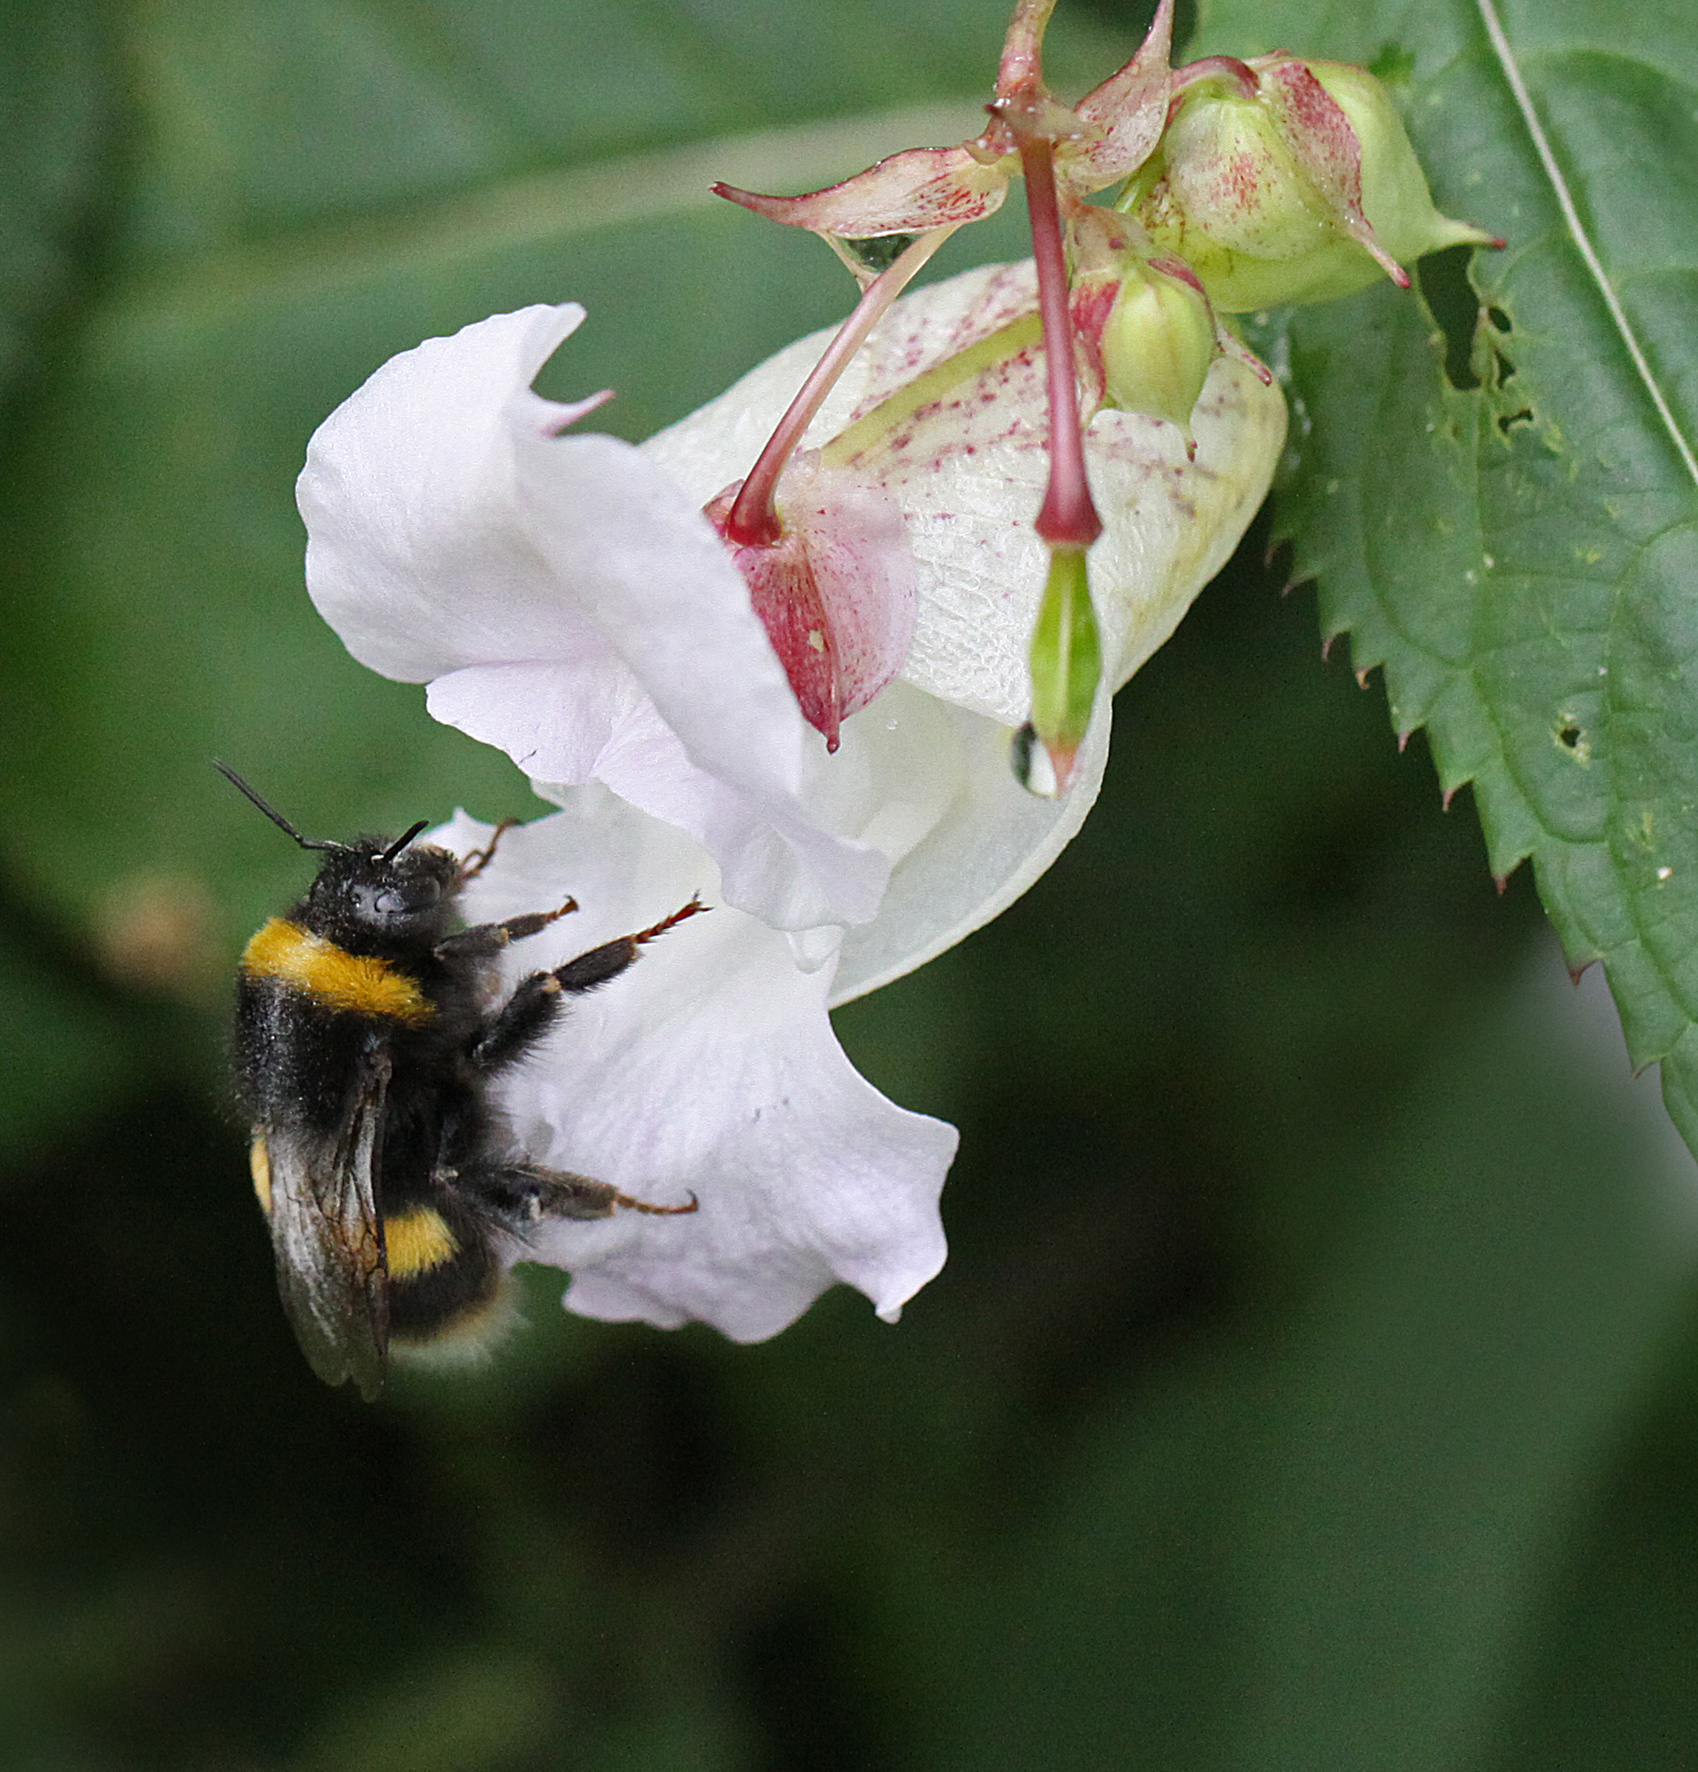 Bumble bee on Balsalm